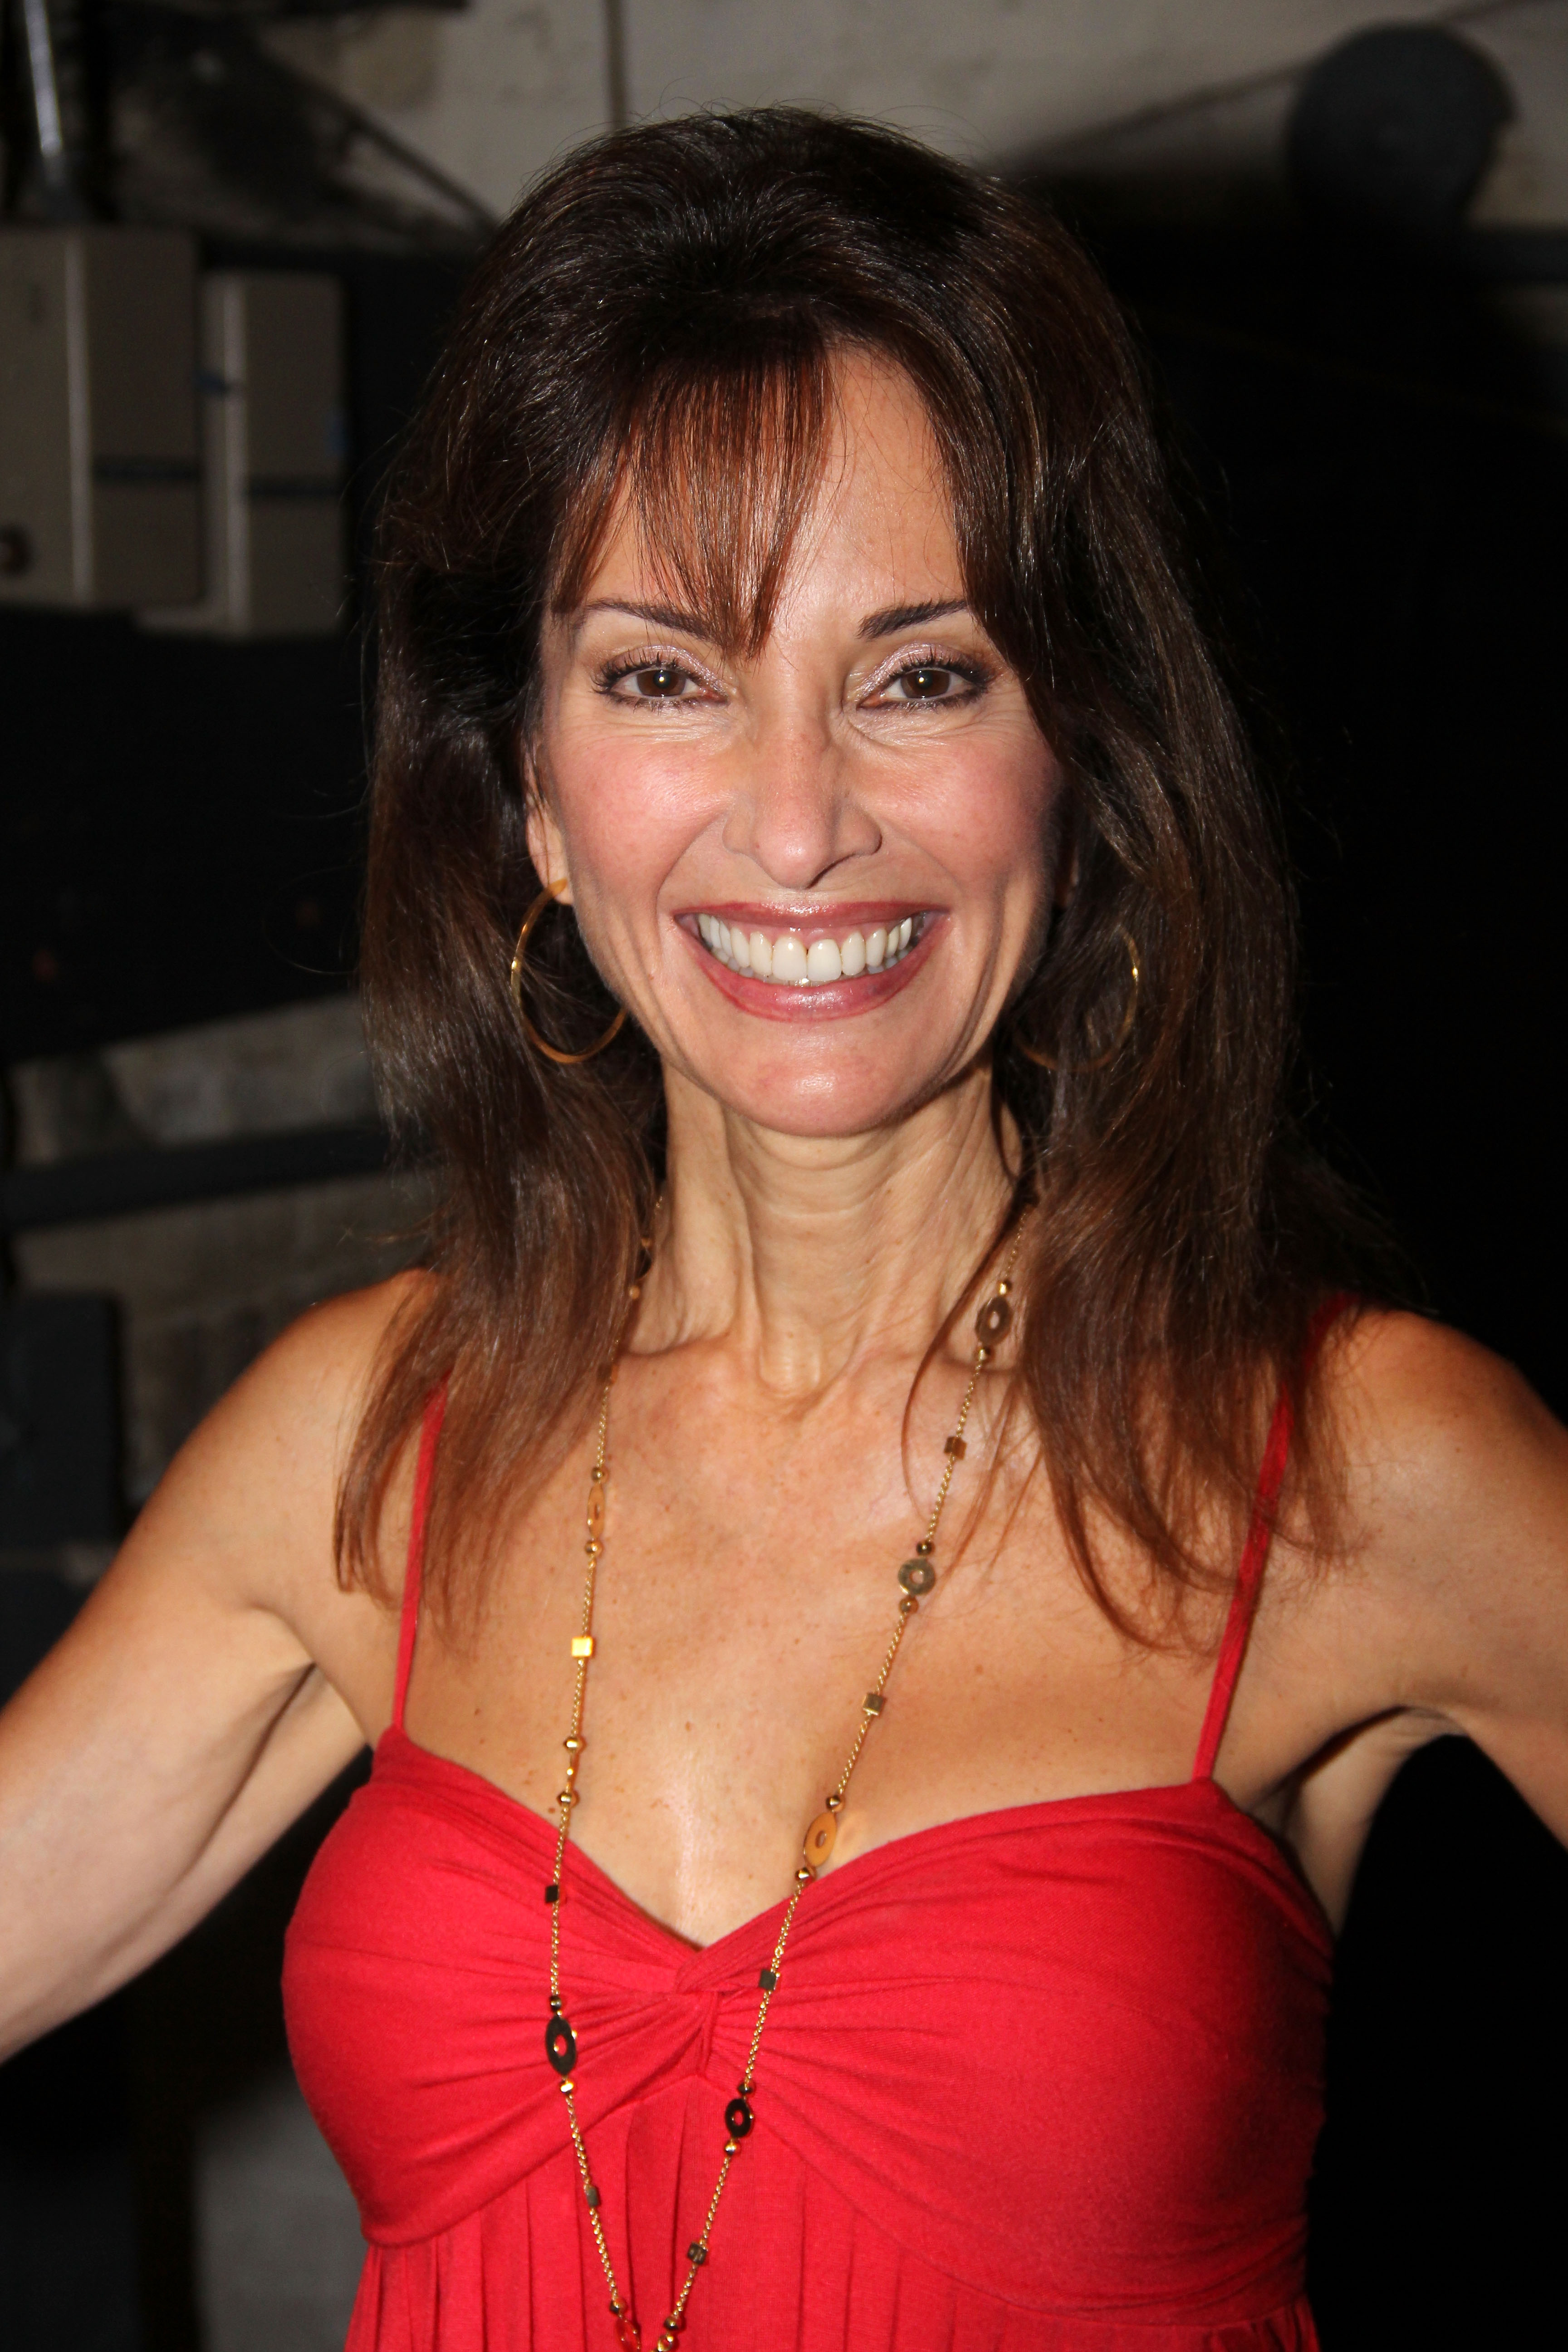 Susan Lucci poses backstage at the musical "Catch Me If You Can" on Broadway on July 6, 2011, in New York City | Source: Getty Images